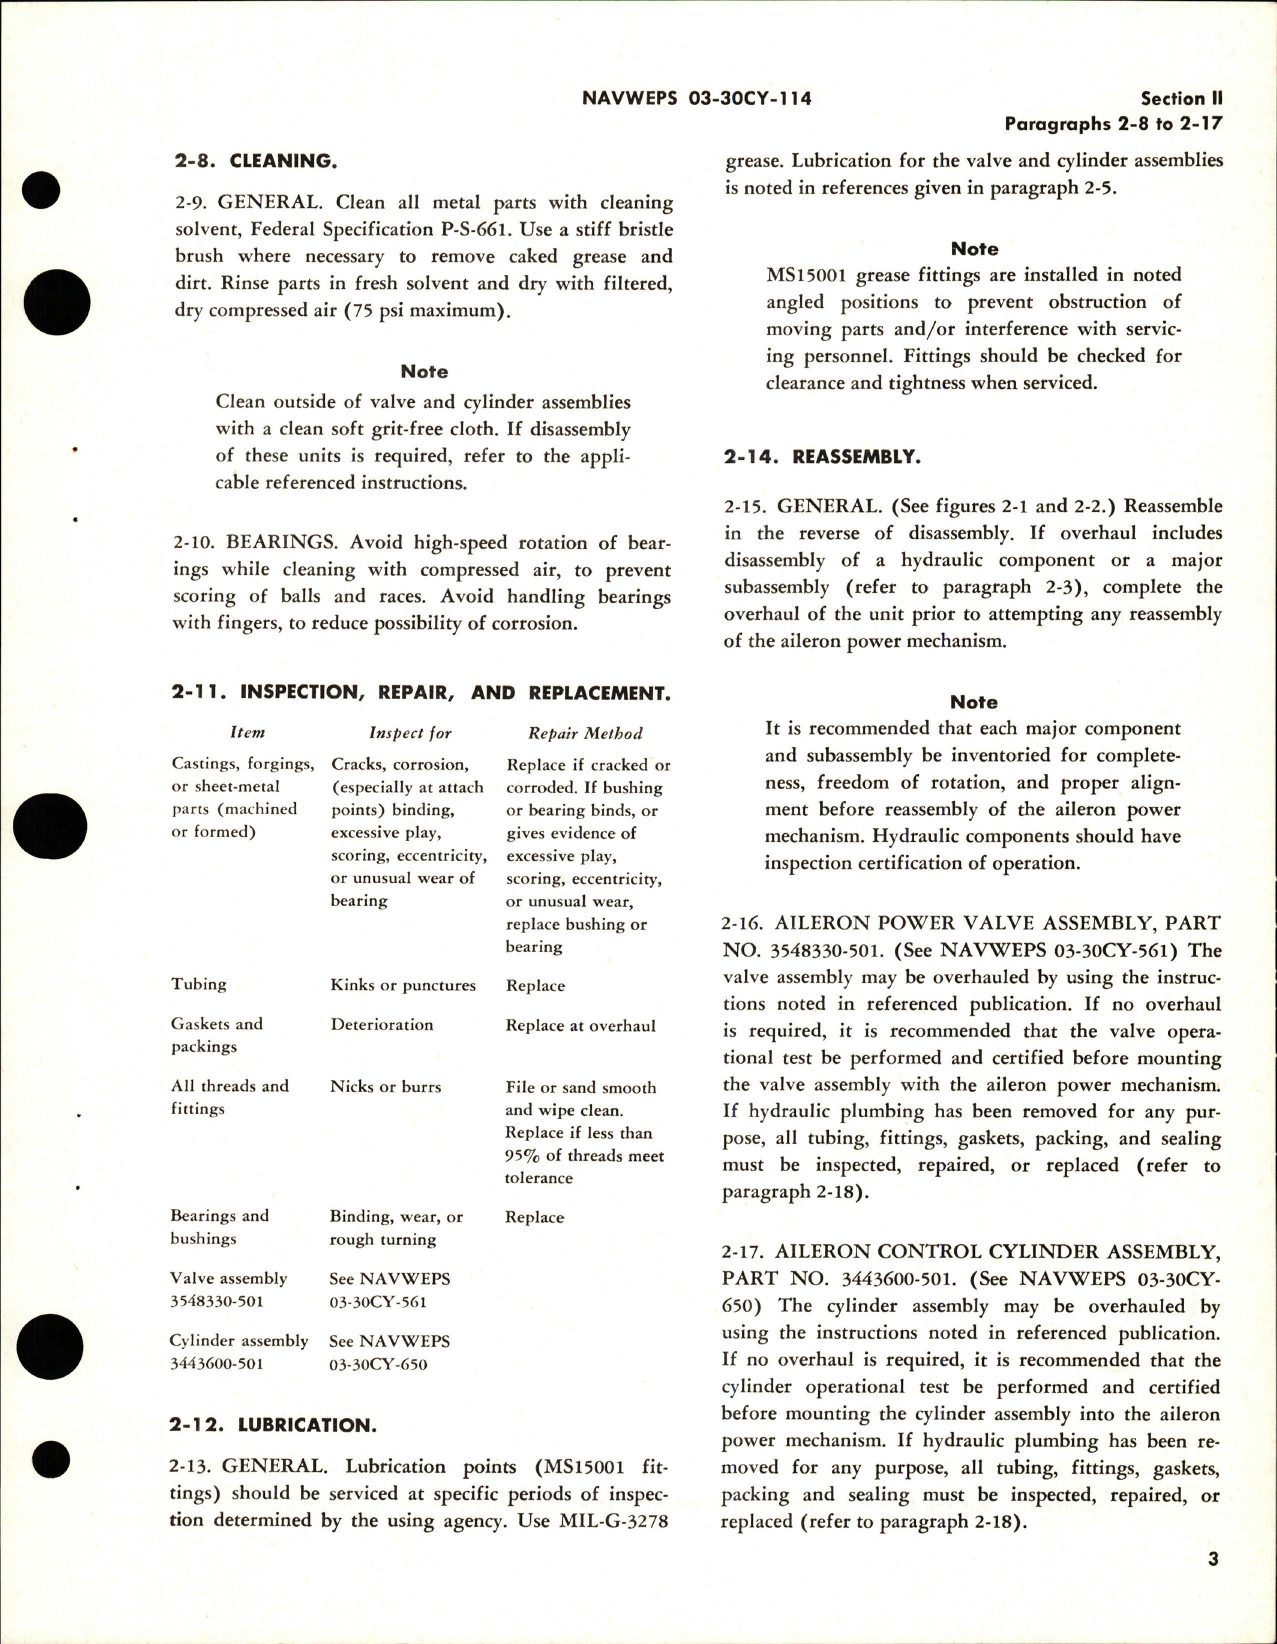 Sample page 7 from AirCorps Library document: Overhaul Instructions for Aileron Power Mechanism Control Assembly